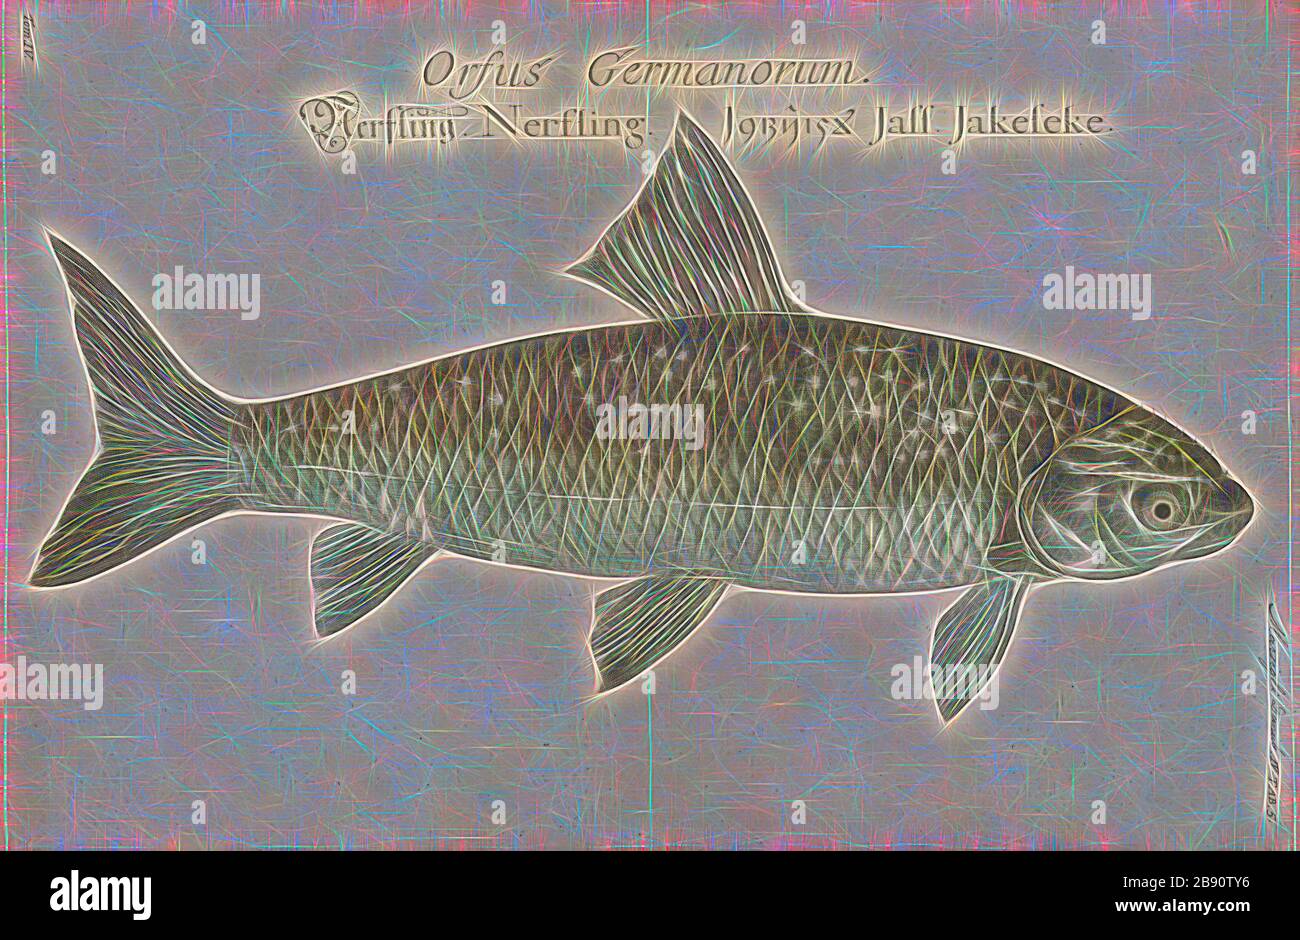 Leuciscus pigus, Print, Leuciscus is a genus of fish belonging to the family Cyprinidae. They are inland water fishes commonly called Eurasian daces. The genus is widespread from Europe to Siberia. Species broadly distributed in Europe include the common dace Leuciscus leuciscus and the ide L. idus., 1700-1880, Reimagined by Gibon, design of warm cheerful glowing of brightness and light rays radiance. Classic art reinvented with a modern twist. Photography inspired by futurism, embracing dynamic energy of modern technology, movement, speed and revolutionize culture. Stock Photo